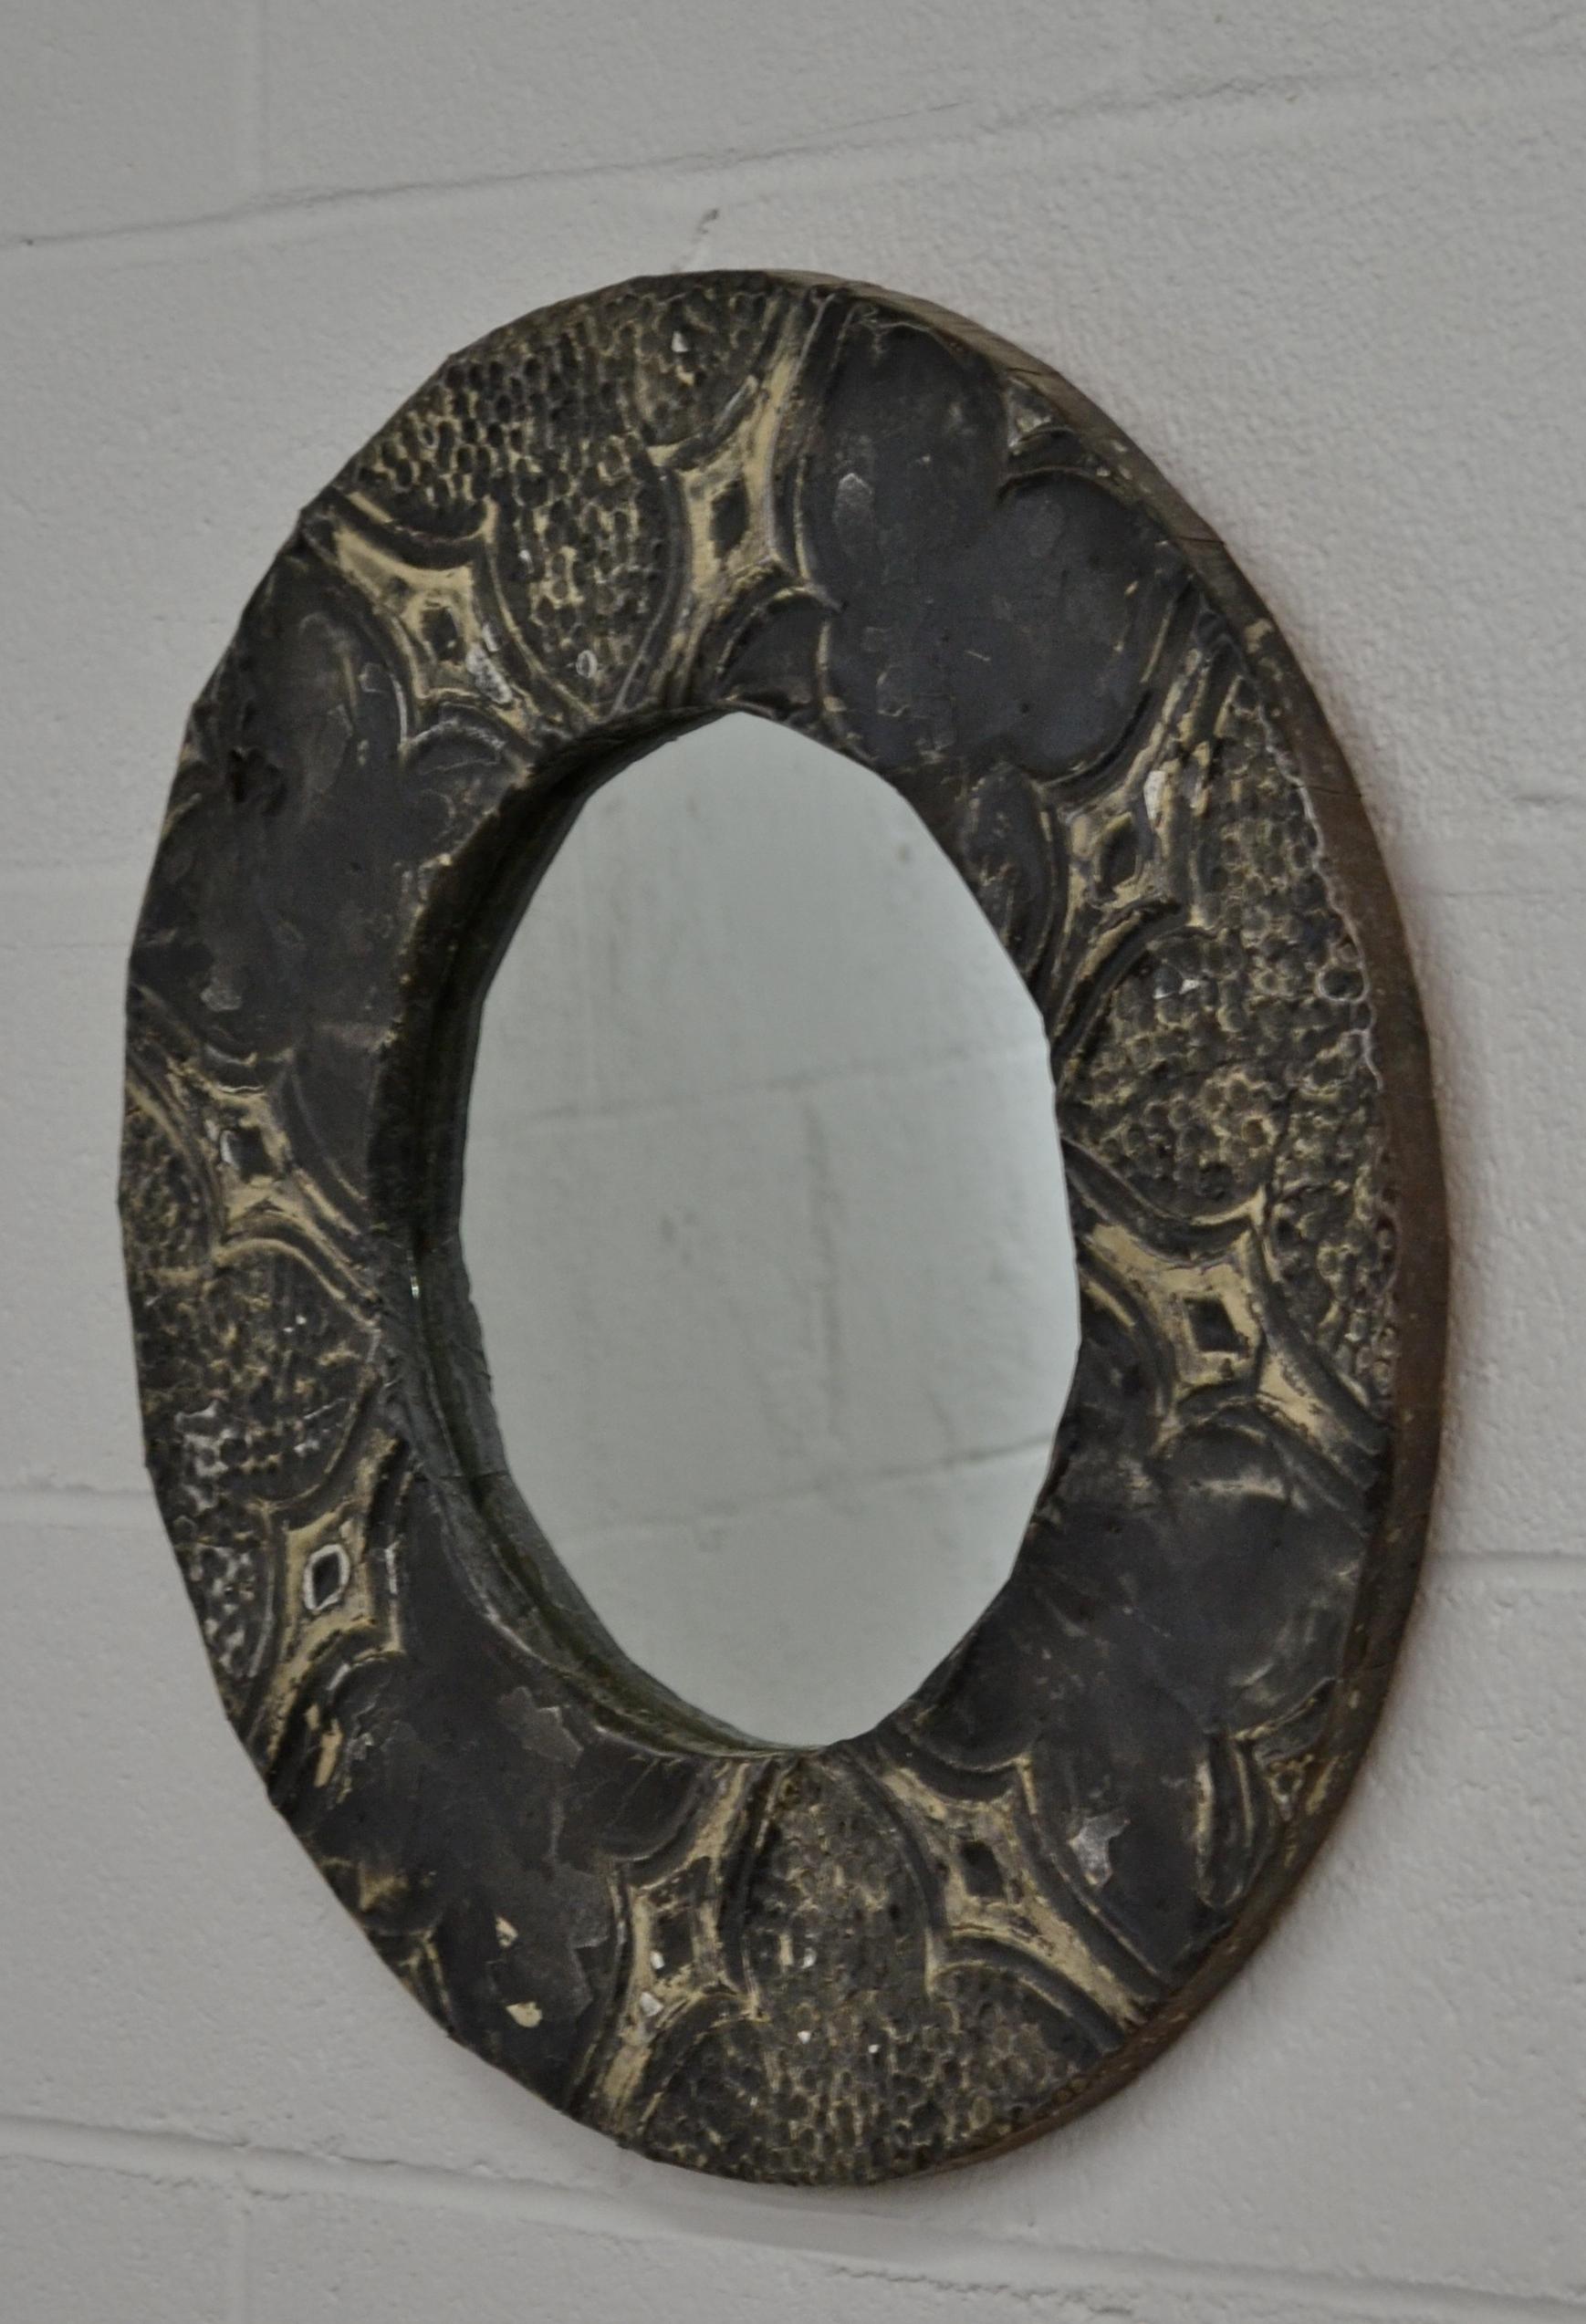 This is a decorative round wall mirror, the frame clad with antique reclaimed ceiling tins in old worn black paint. New glass. This mirror would be perfect for a small powder room or hallway.